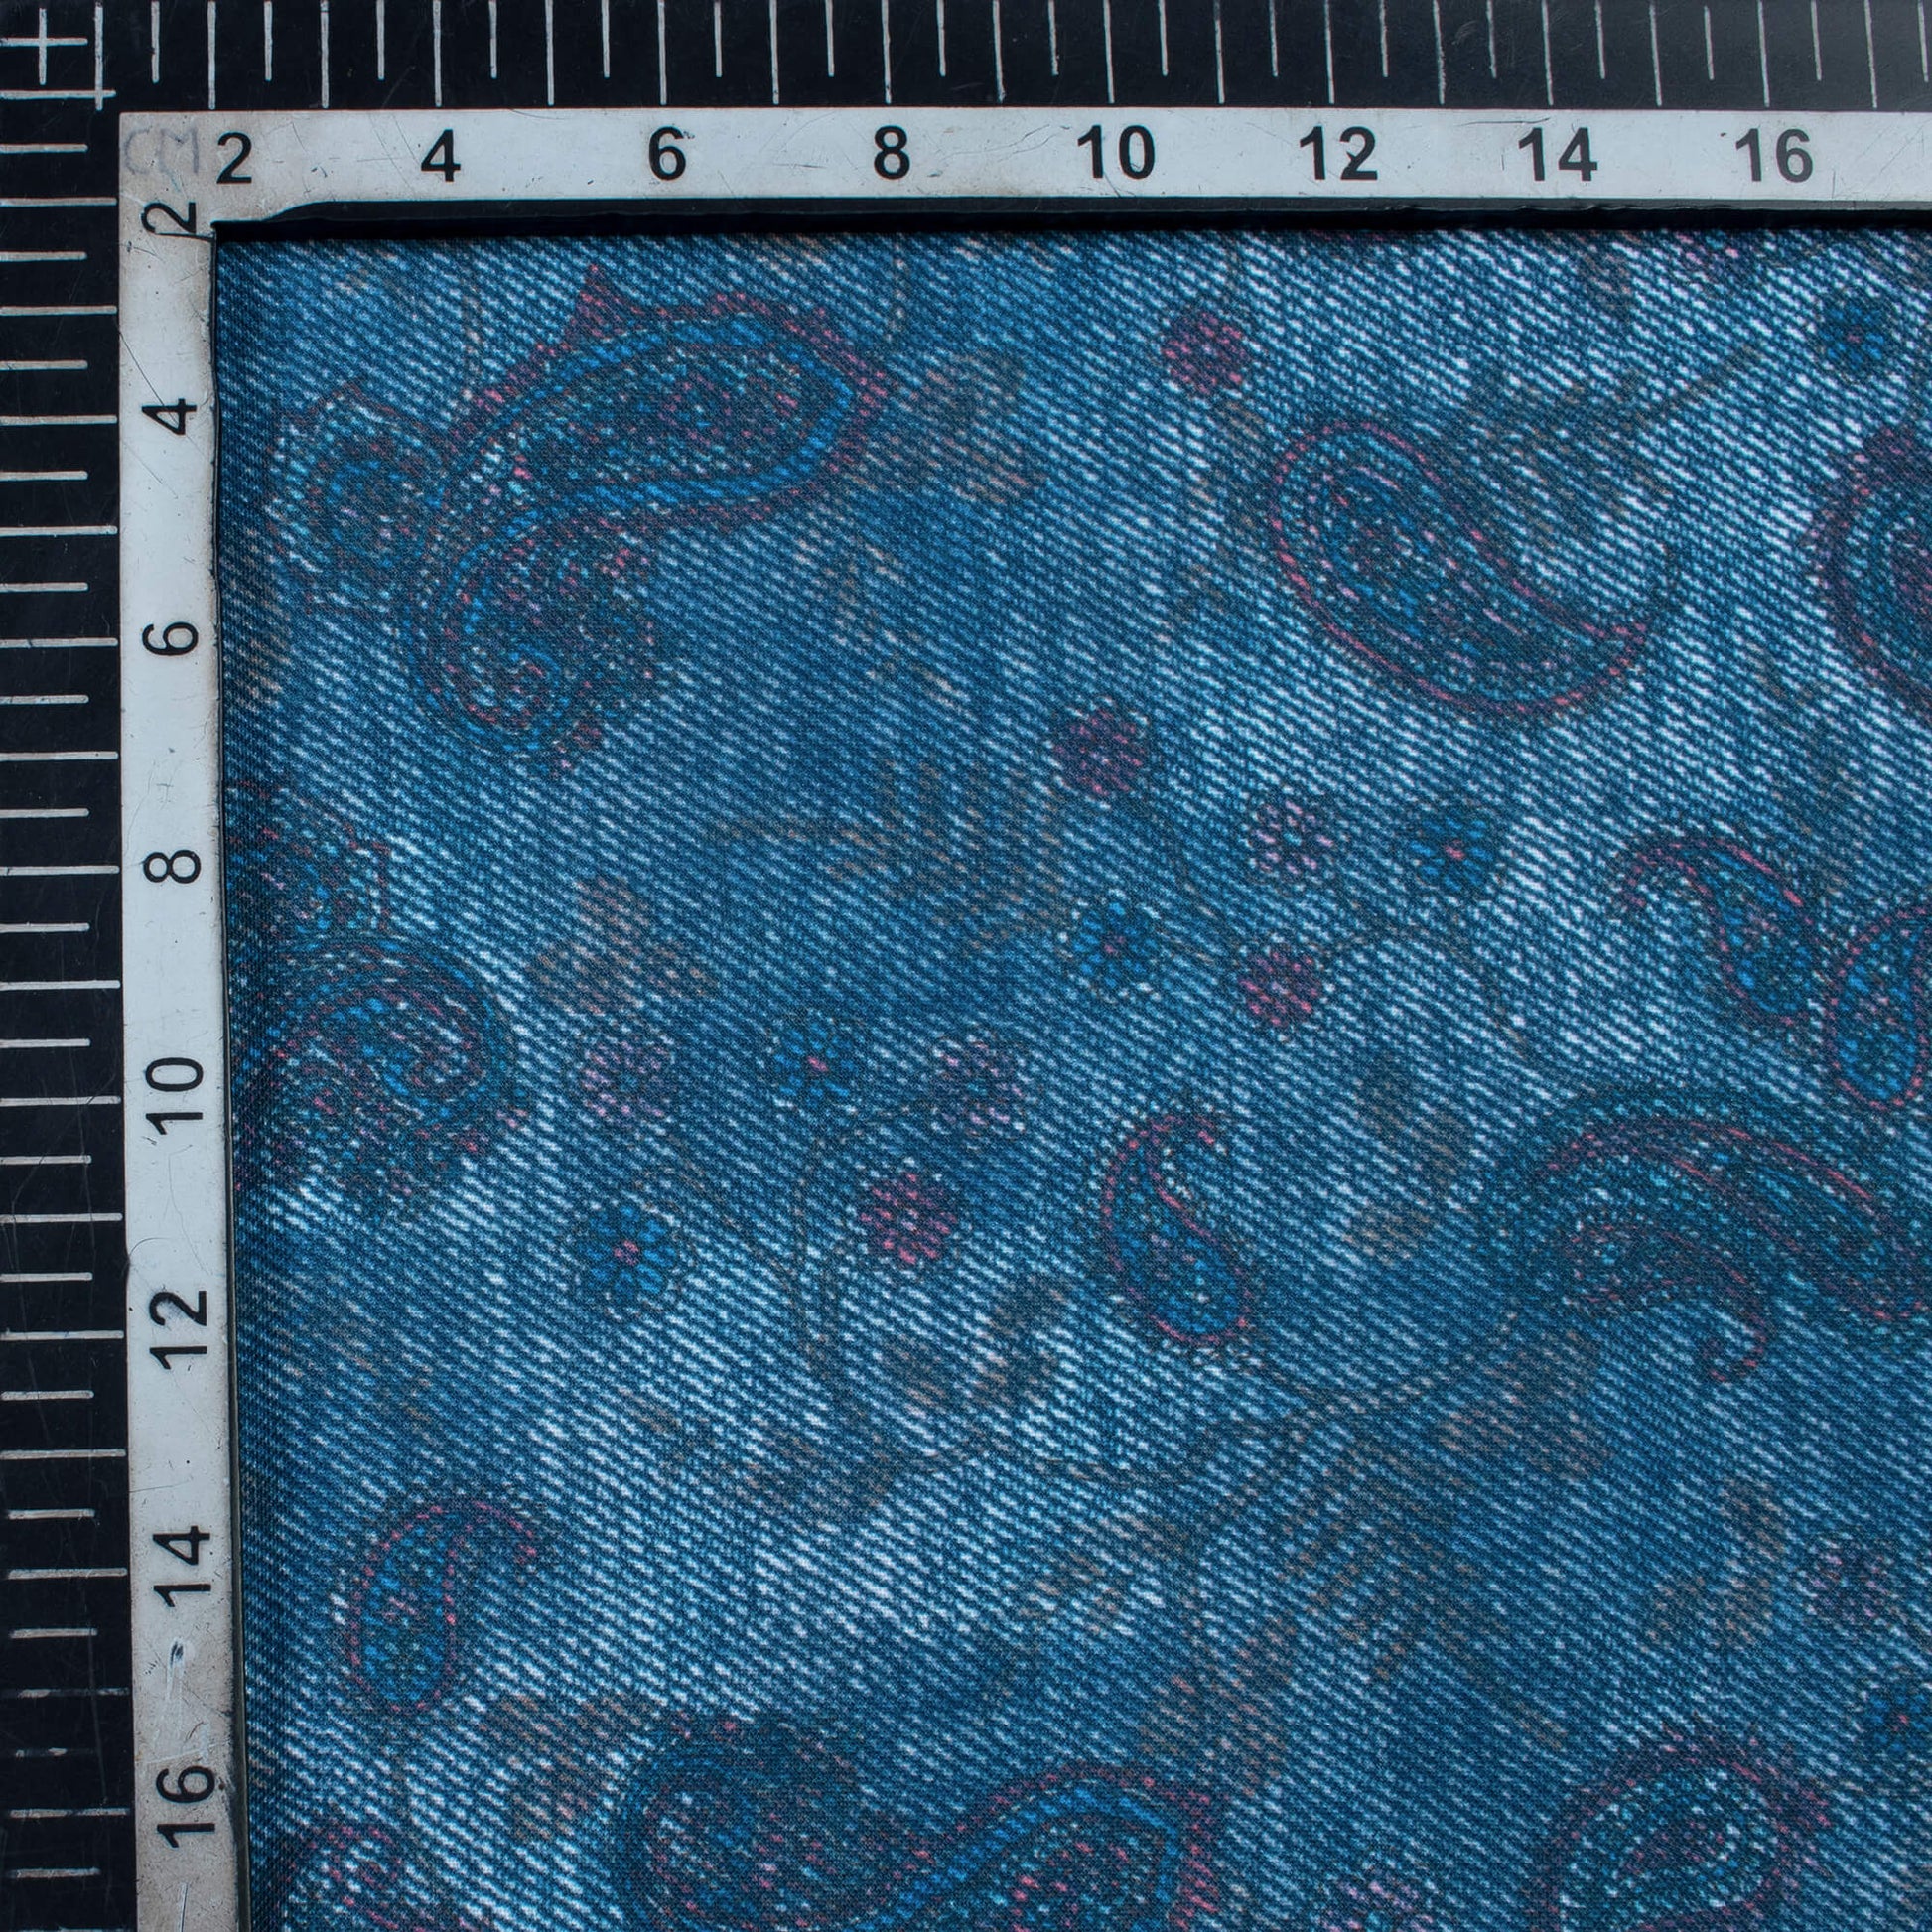 Yale Blue And Red Denim Pattern Digital Print Rayon Fabric - Fabcurate